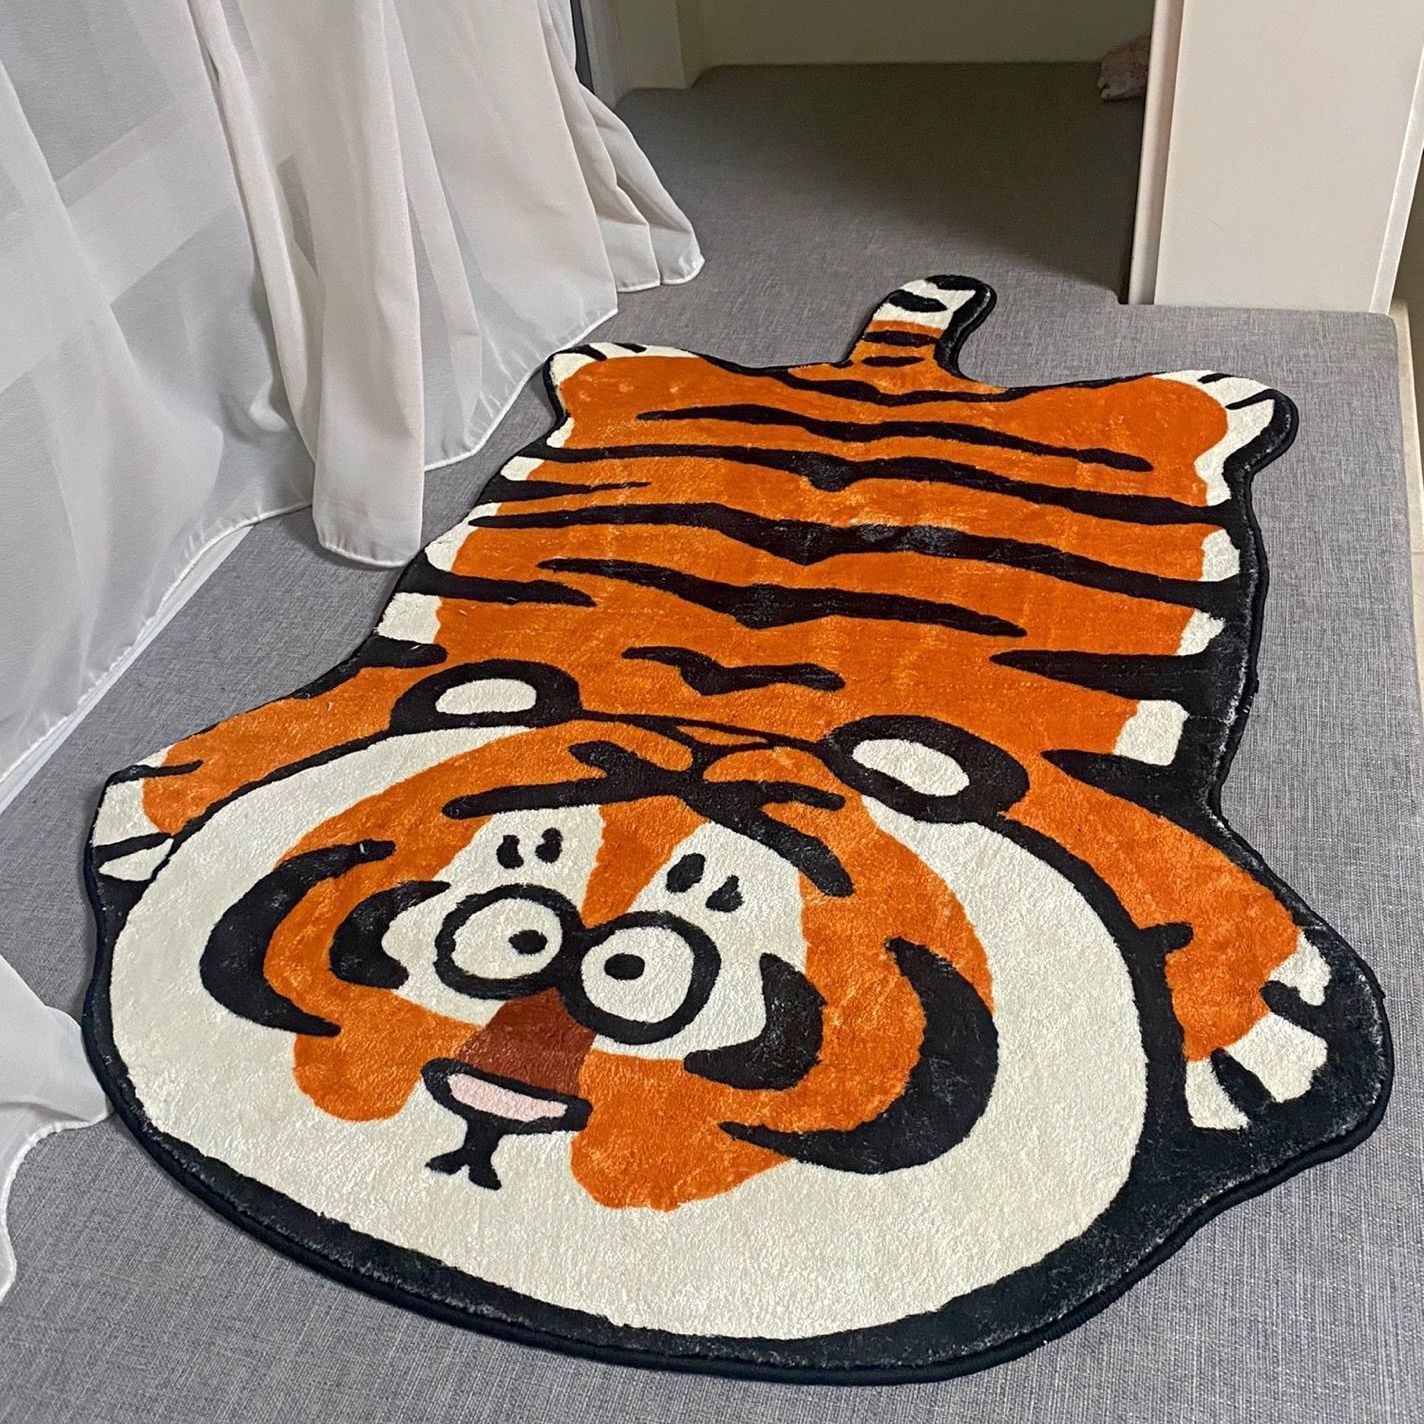 Ins imitation cashmere thickened fat tiger floor mat bedroom bedside carpet girl cloakroom water absorption bathroom non slip foot pad